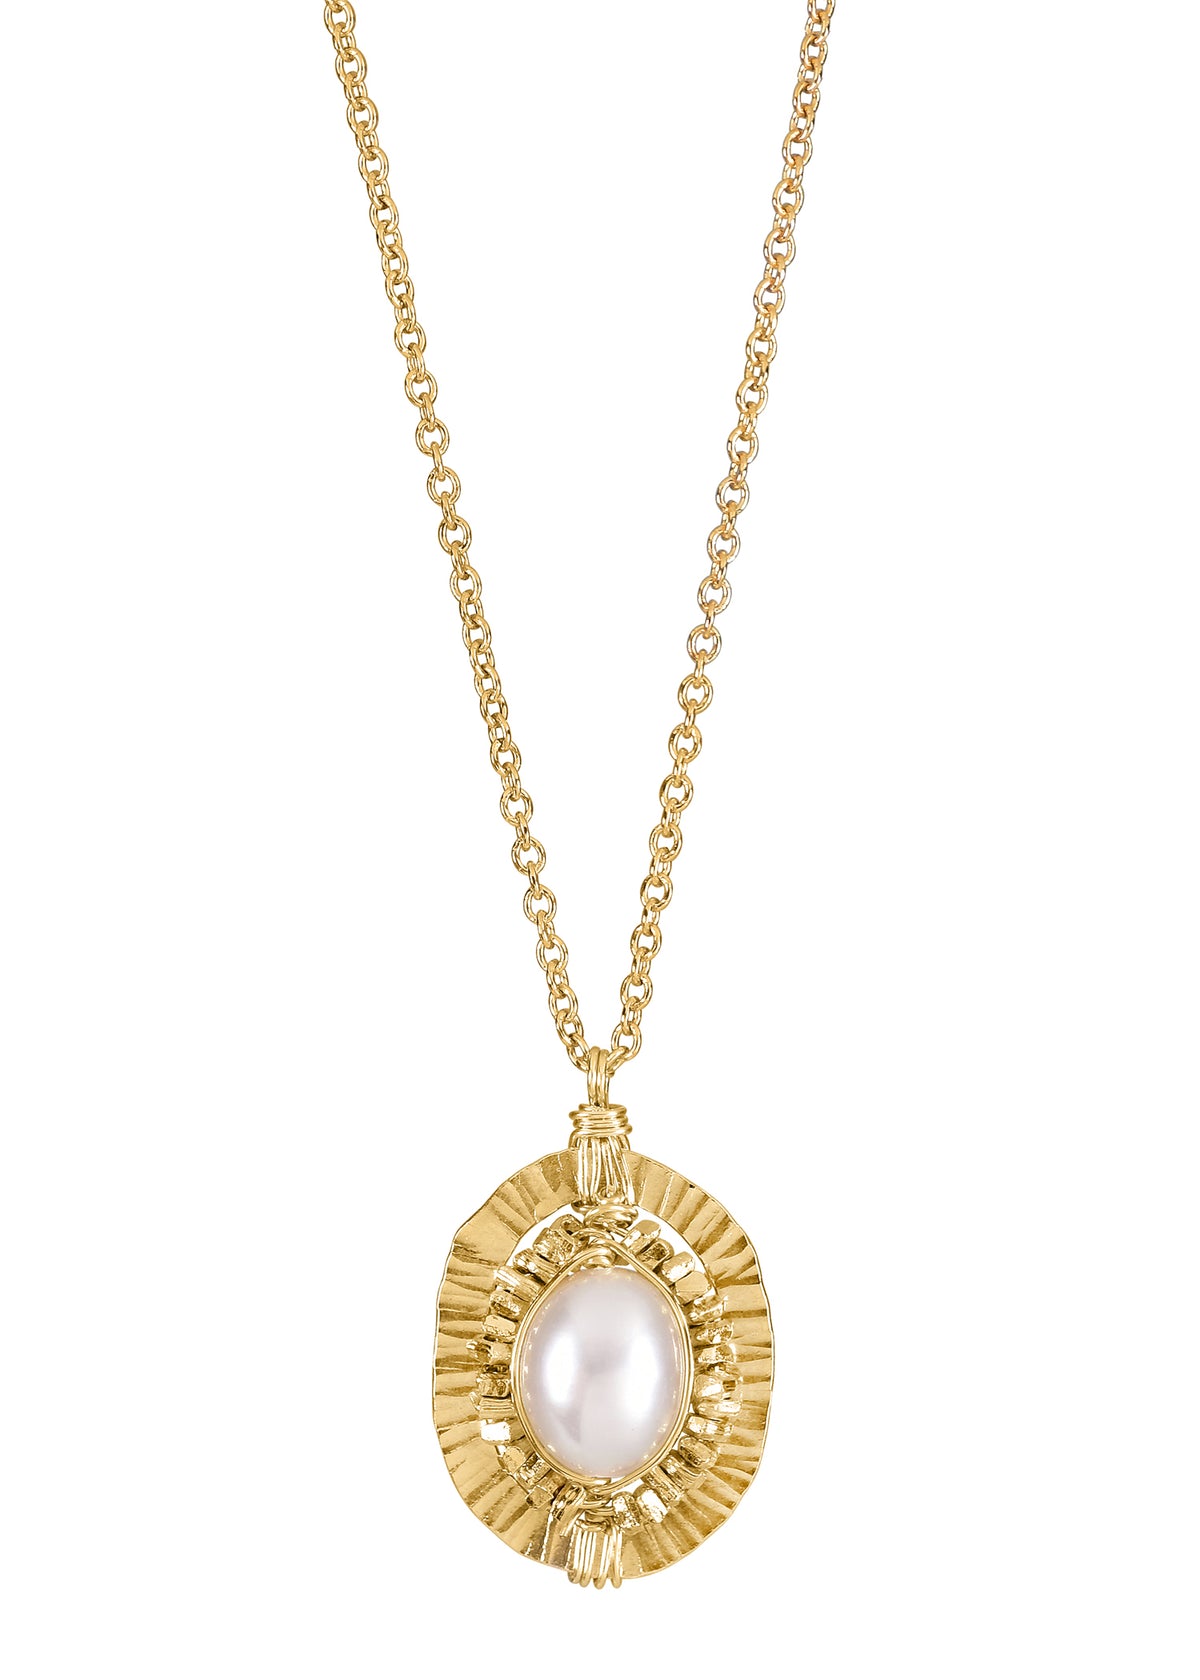 Freshwater pearl 14k gold fill 14k gold vermeil sterling silver beads Necklace measures 17&quot; in length Pendant measures 9/16&quot; in length and 7/16&quot; in width Handmade in our Los Angeles studio